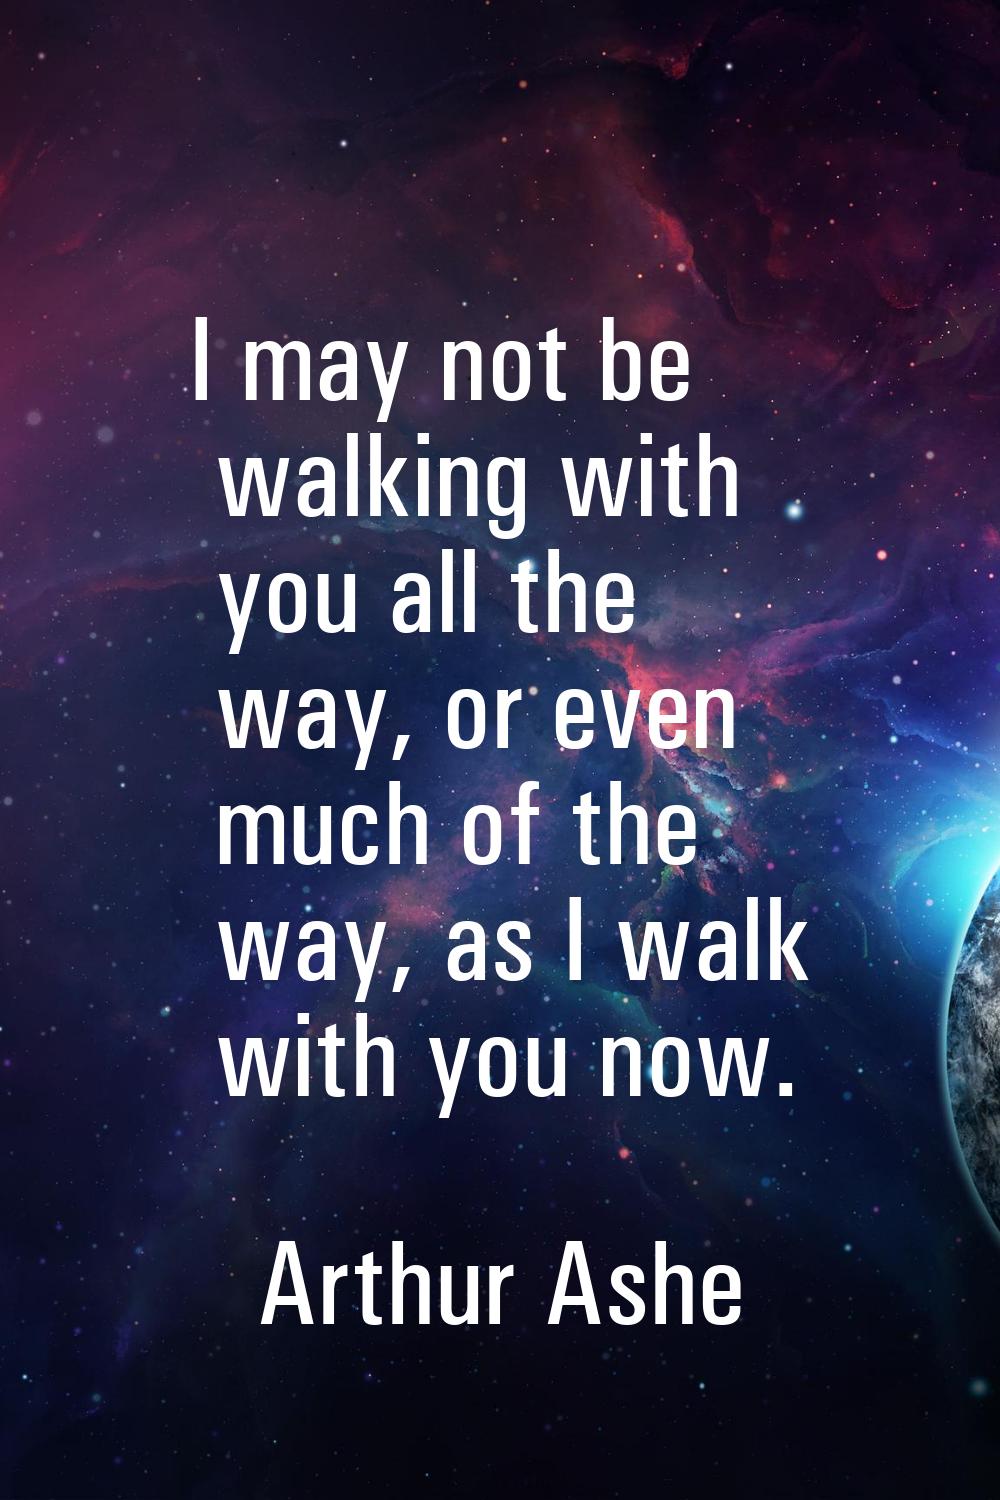 I may not be walking with you all the way, or even much of the way, as I walk with you now.